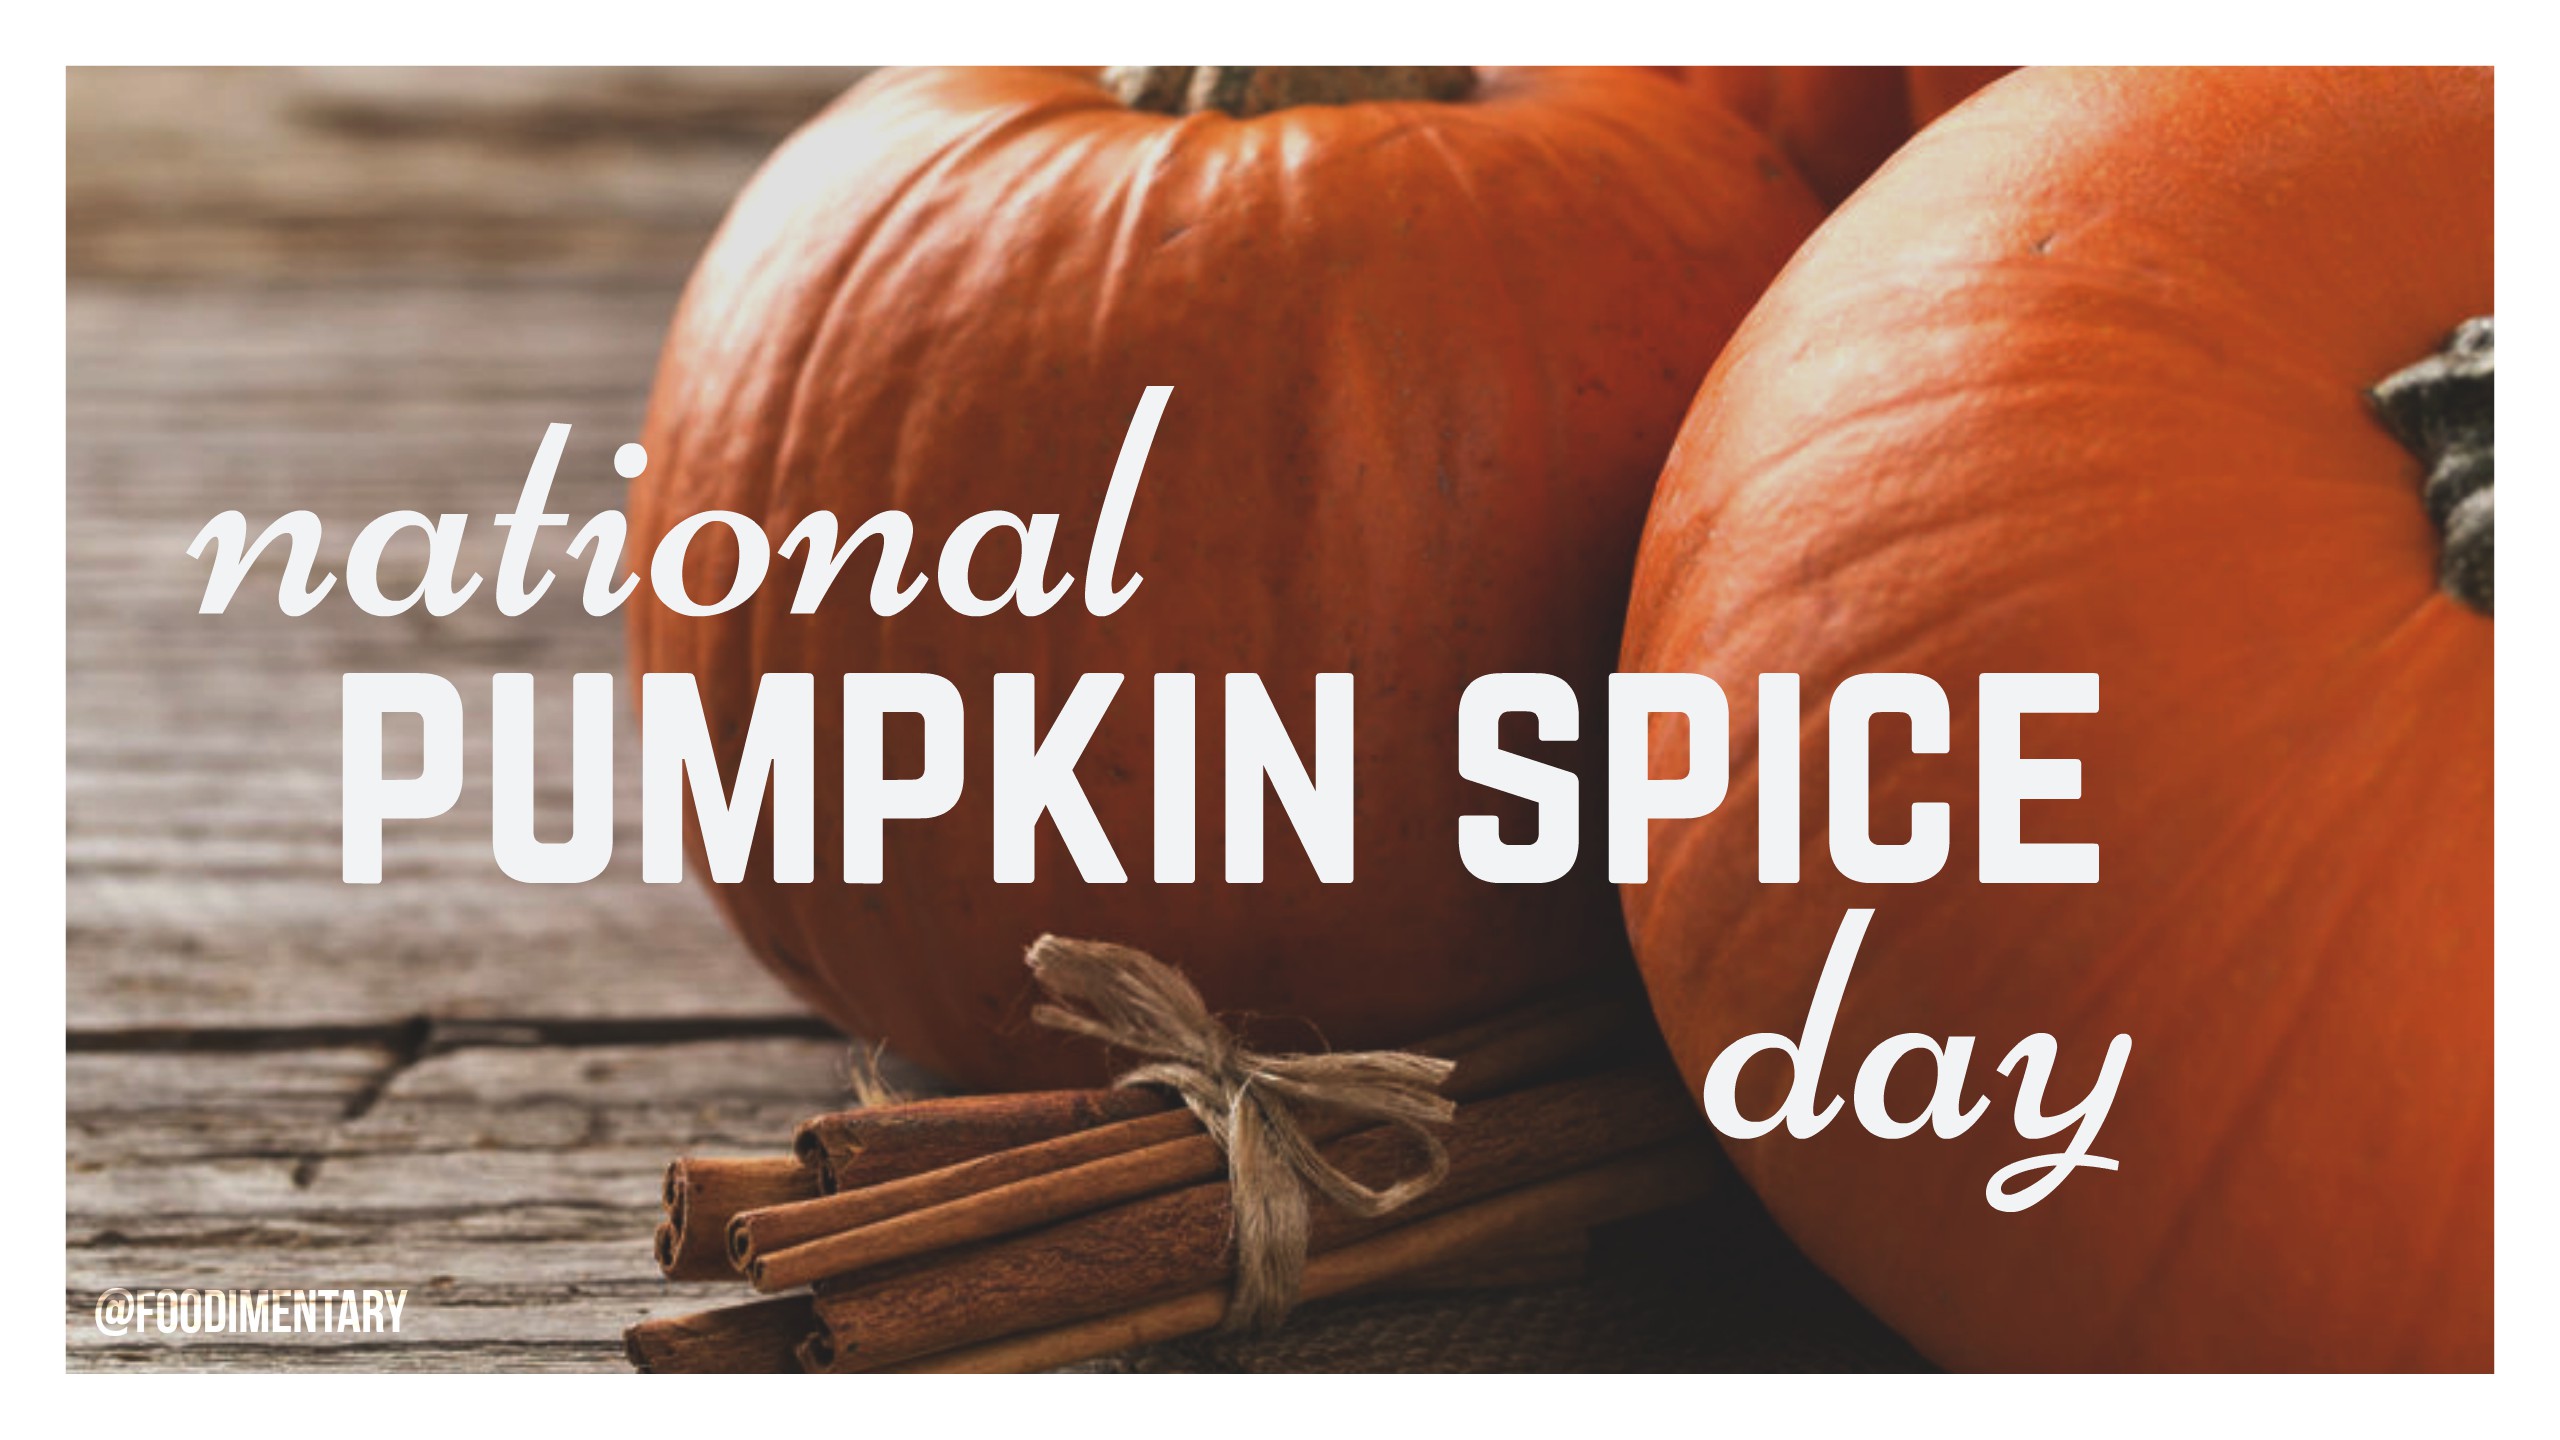 October 1st is National Pumpkin Spice Day! | Foodimentary - National ...